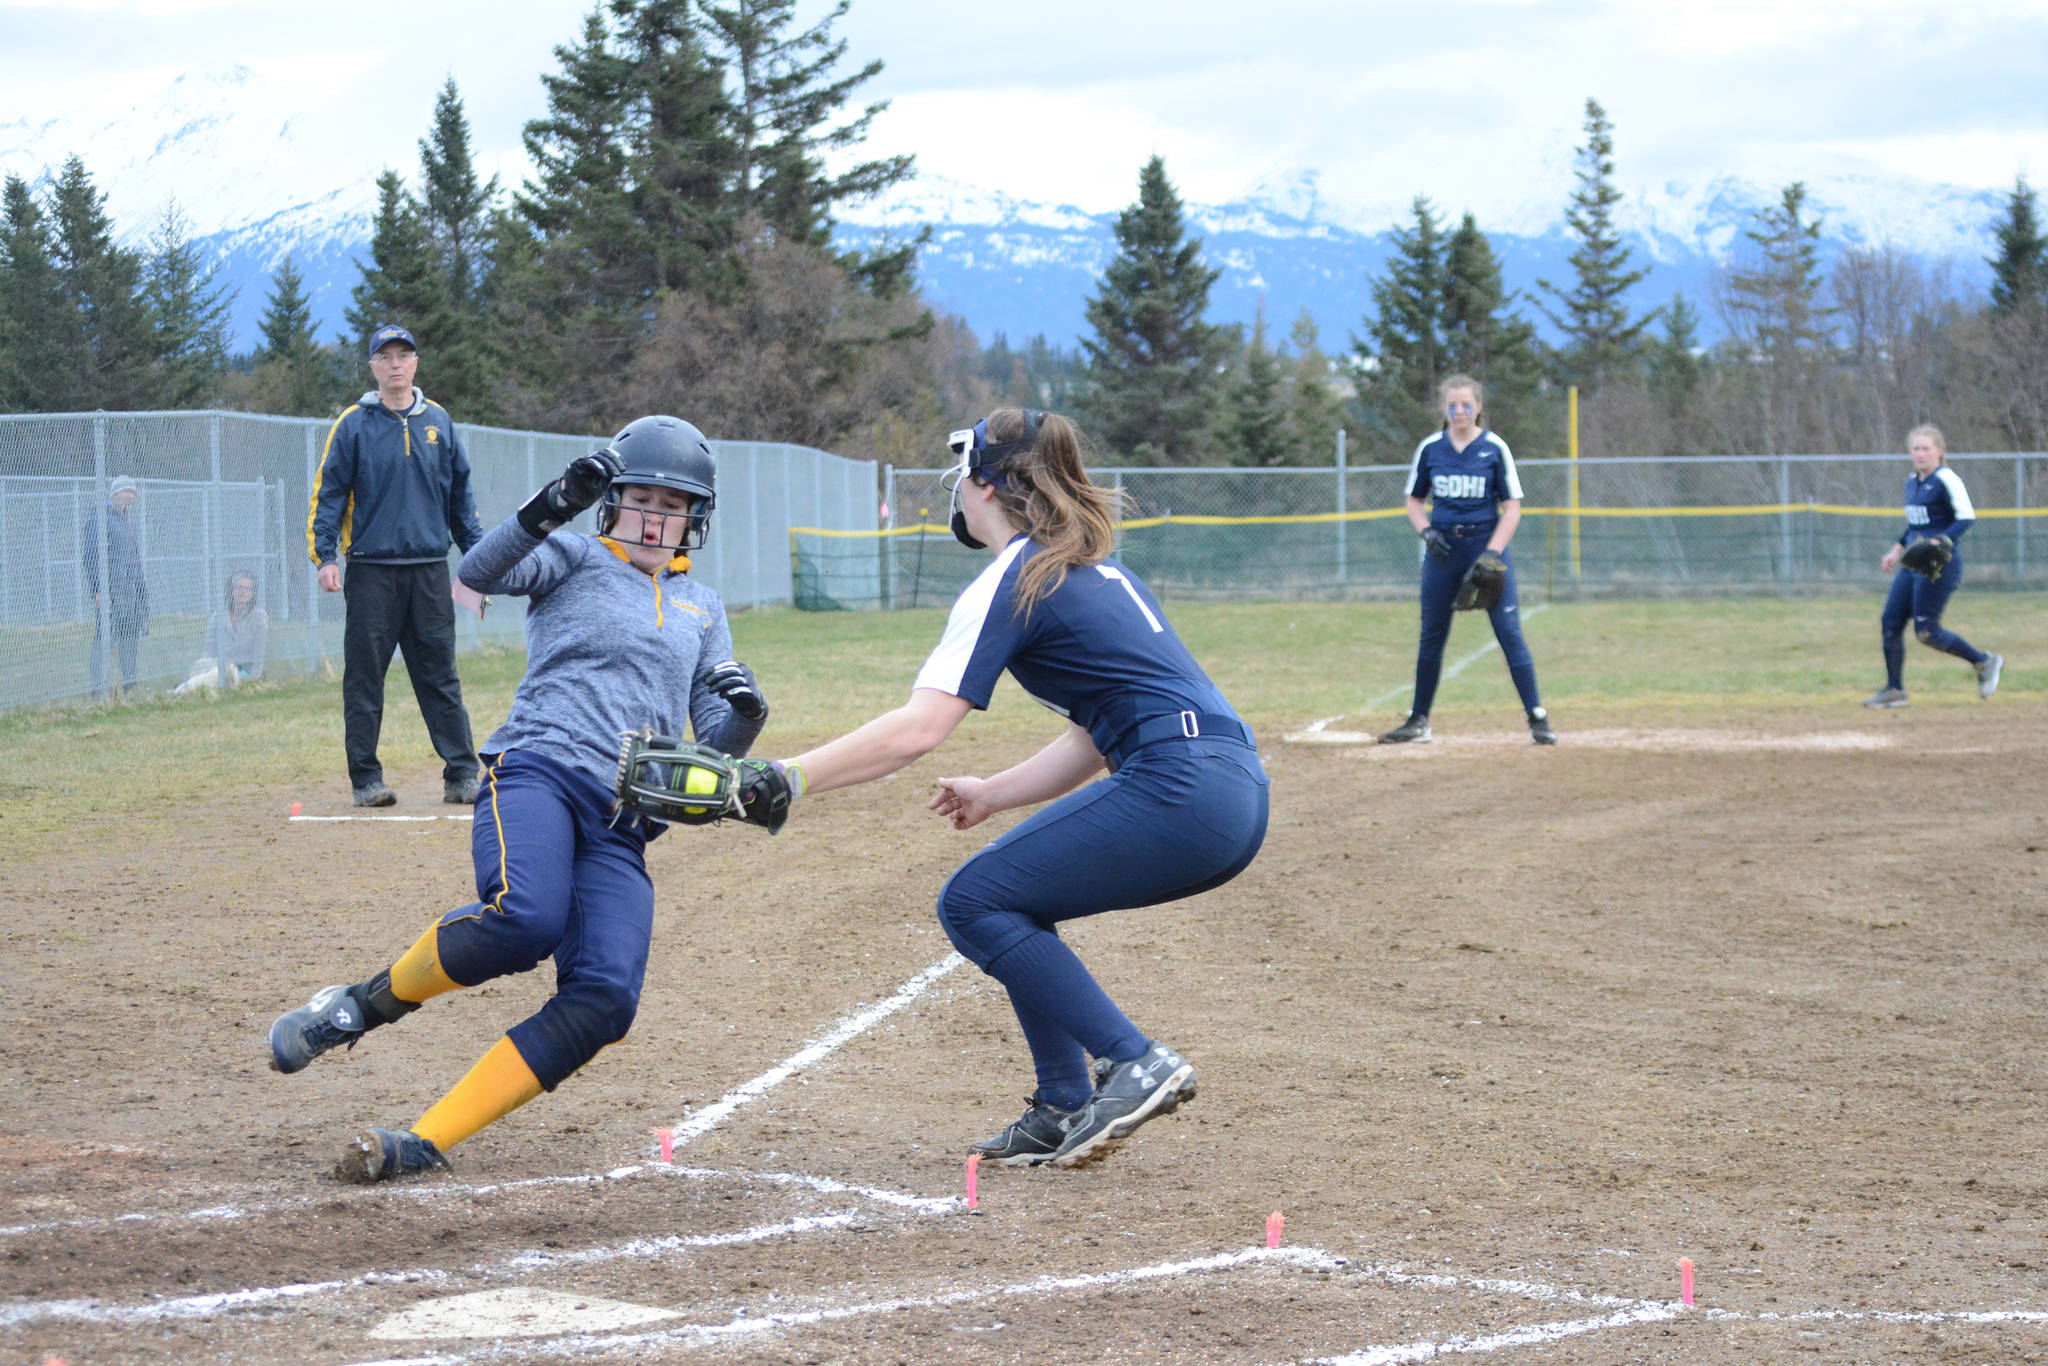 SoHi softball catcher Casey tags out Homer High School Mariner Grace Godfrey as she tries for home plate in a game against the Homer High School Mariners on Tuesday, April 30, 2019, at Jack Gist Park in Homer, Alaska. Godfrey later redeemed herself with a grand slam home run. (Photo by Michael Armstrong/Homer News)